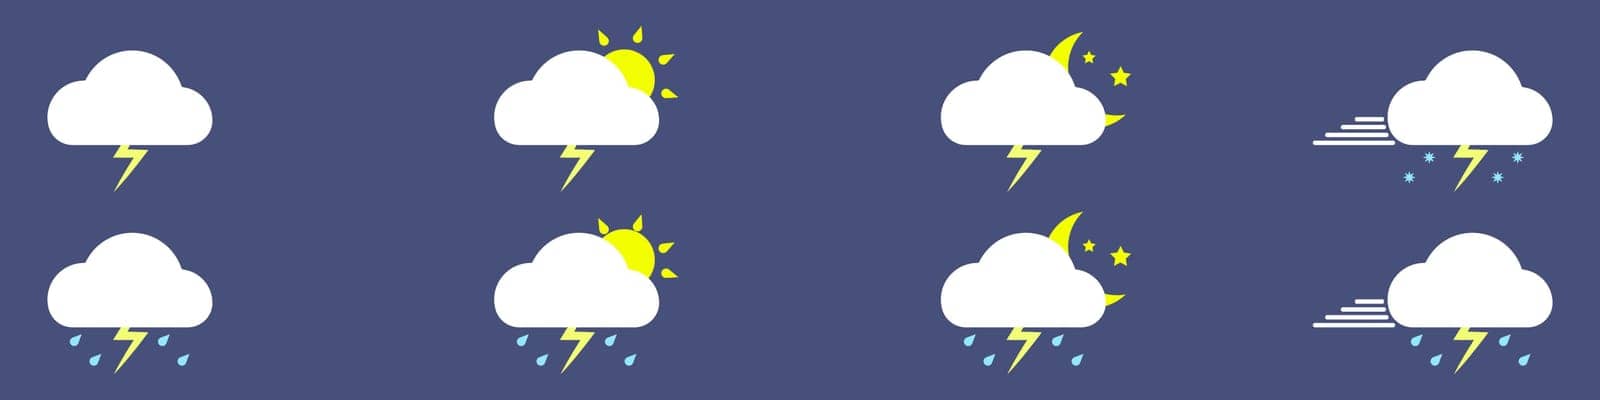 Weather icons vector set. Set of meteorological icons. Rainfall icons. Weather conditions icons in flat style. Vector illustration. by Moreidea